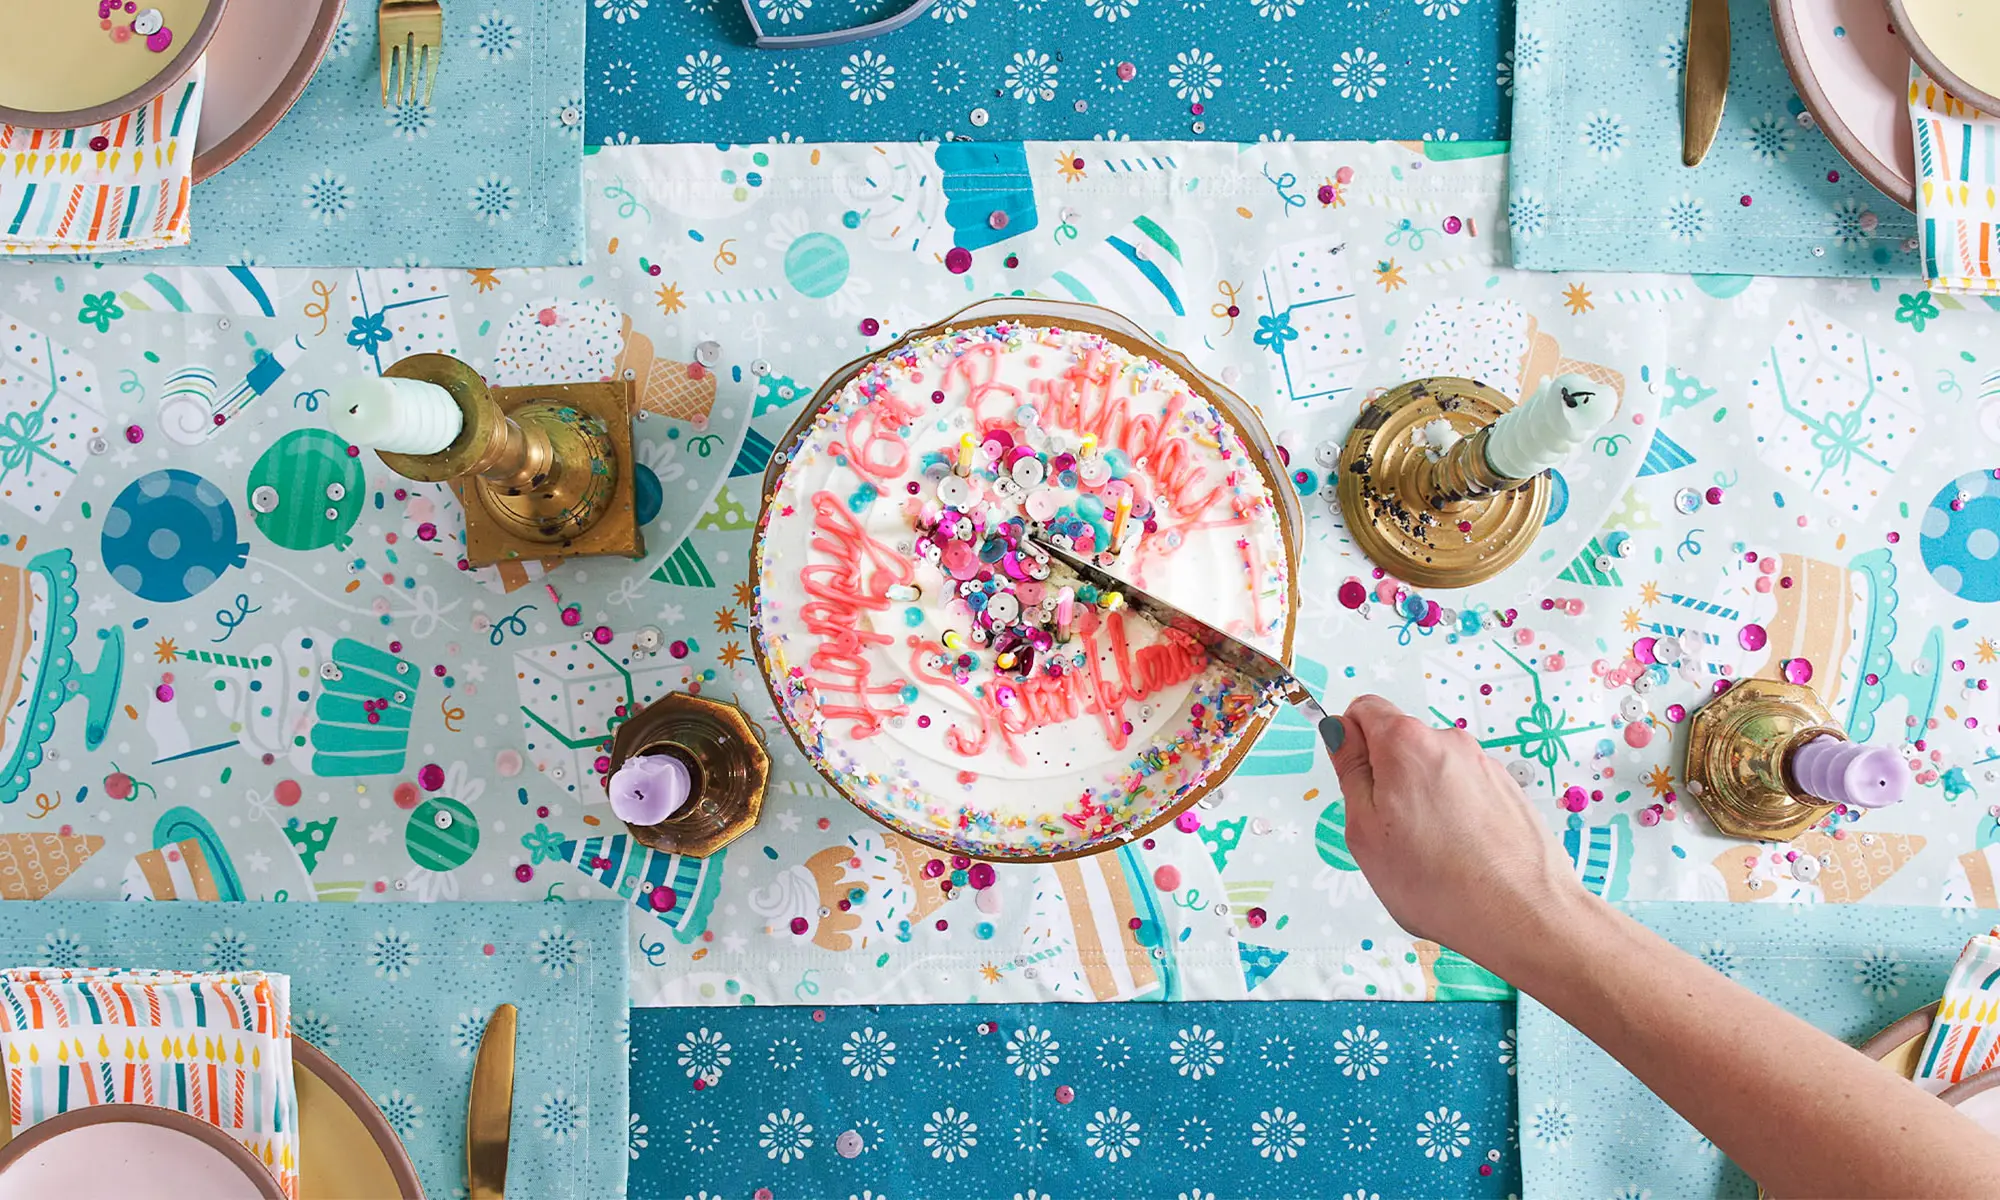 Table with birthday and spoonflower themed runner, tablecloth and placemats and a person cutting a cake.